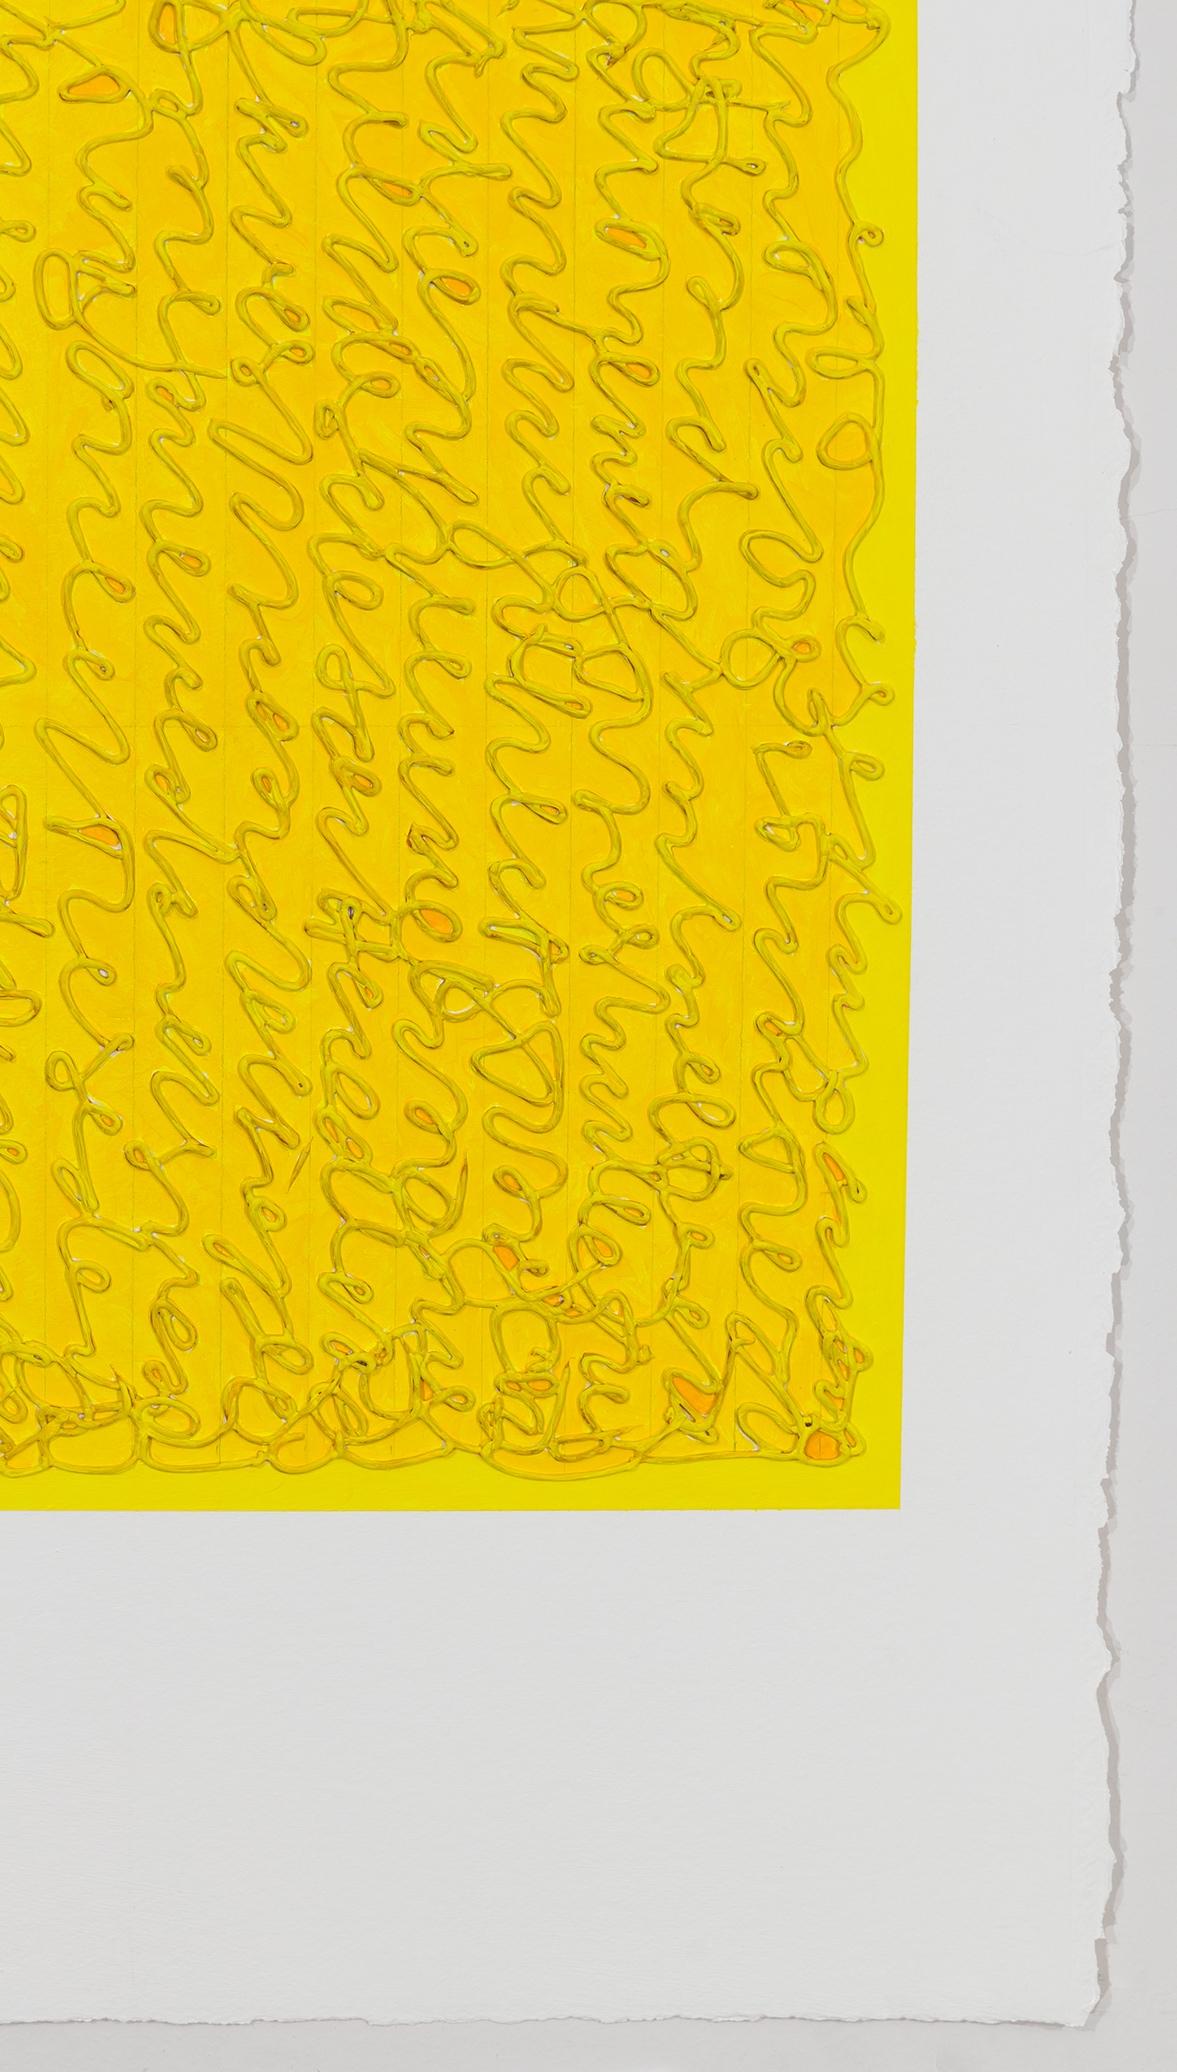 This minimalist yellow abstract textural work on paper is by Louise P. Sloane.   
The visual language of her paintings embraces the legacies of reductive and minimalist ideologies, while celebrating the beauty of color, and the human connection to